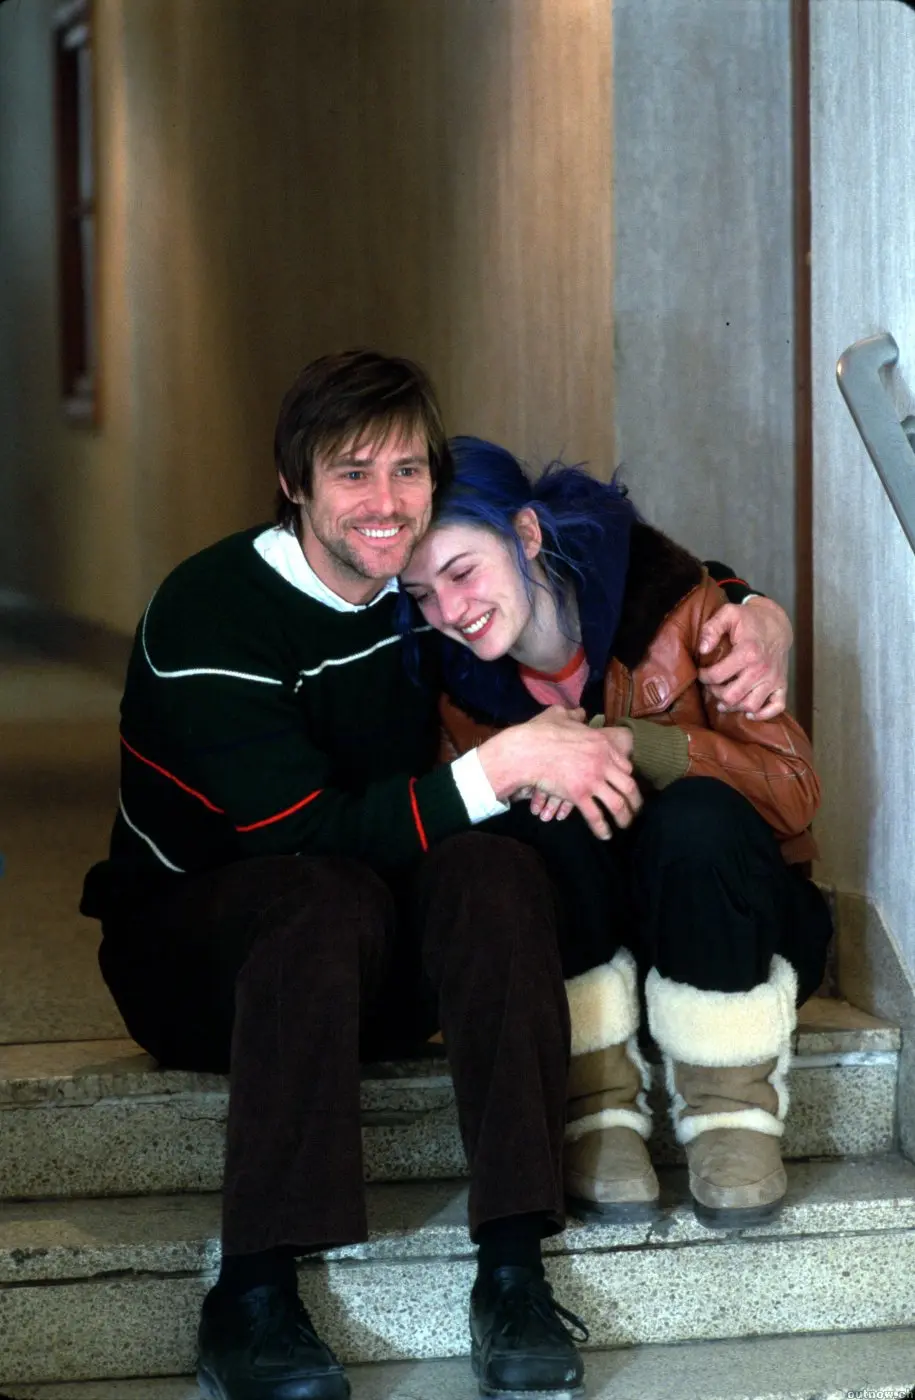 Jim Carrey as Joel and Kate Winslet as Clementine